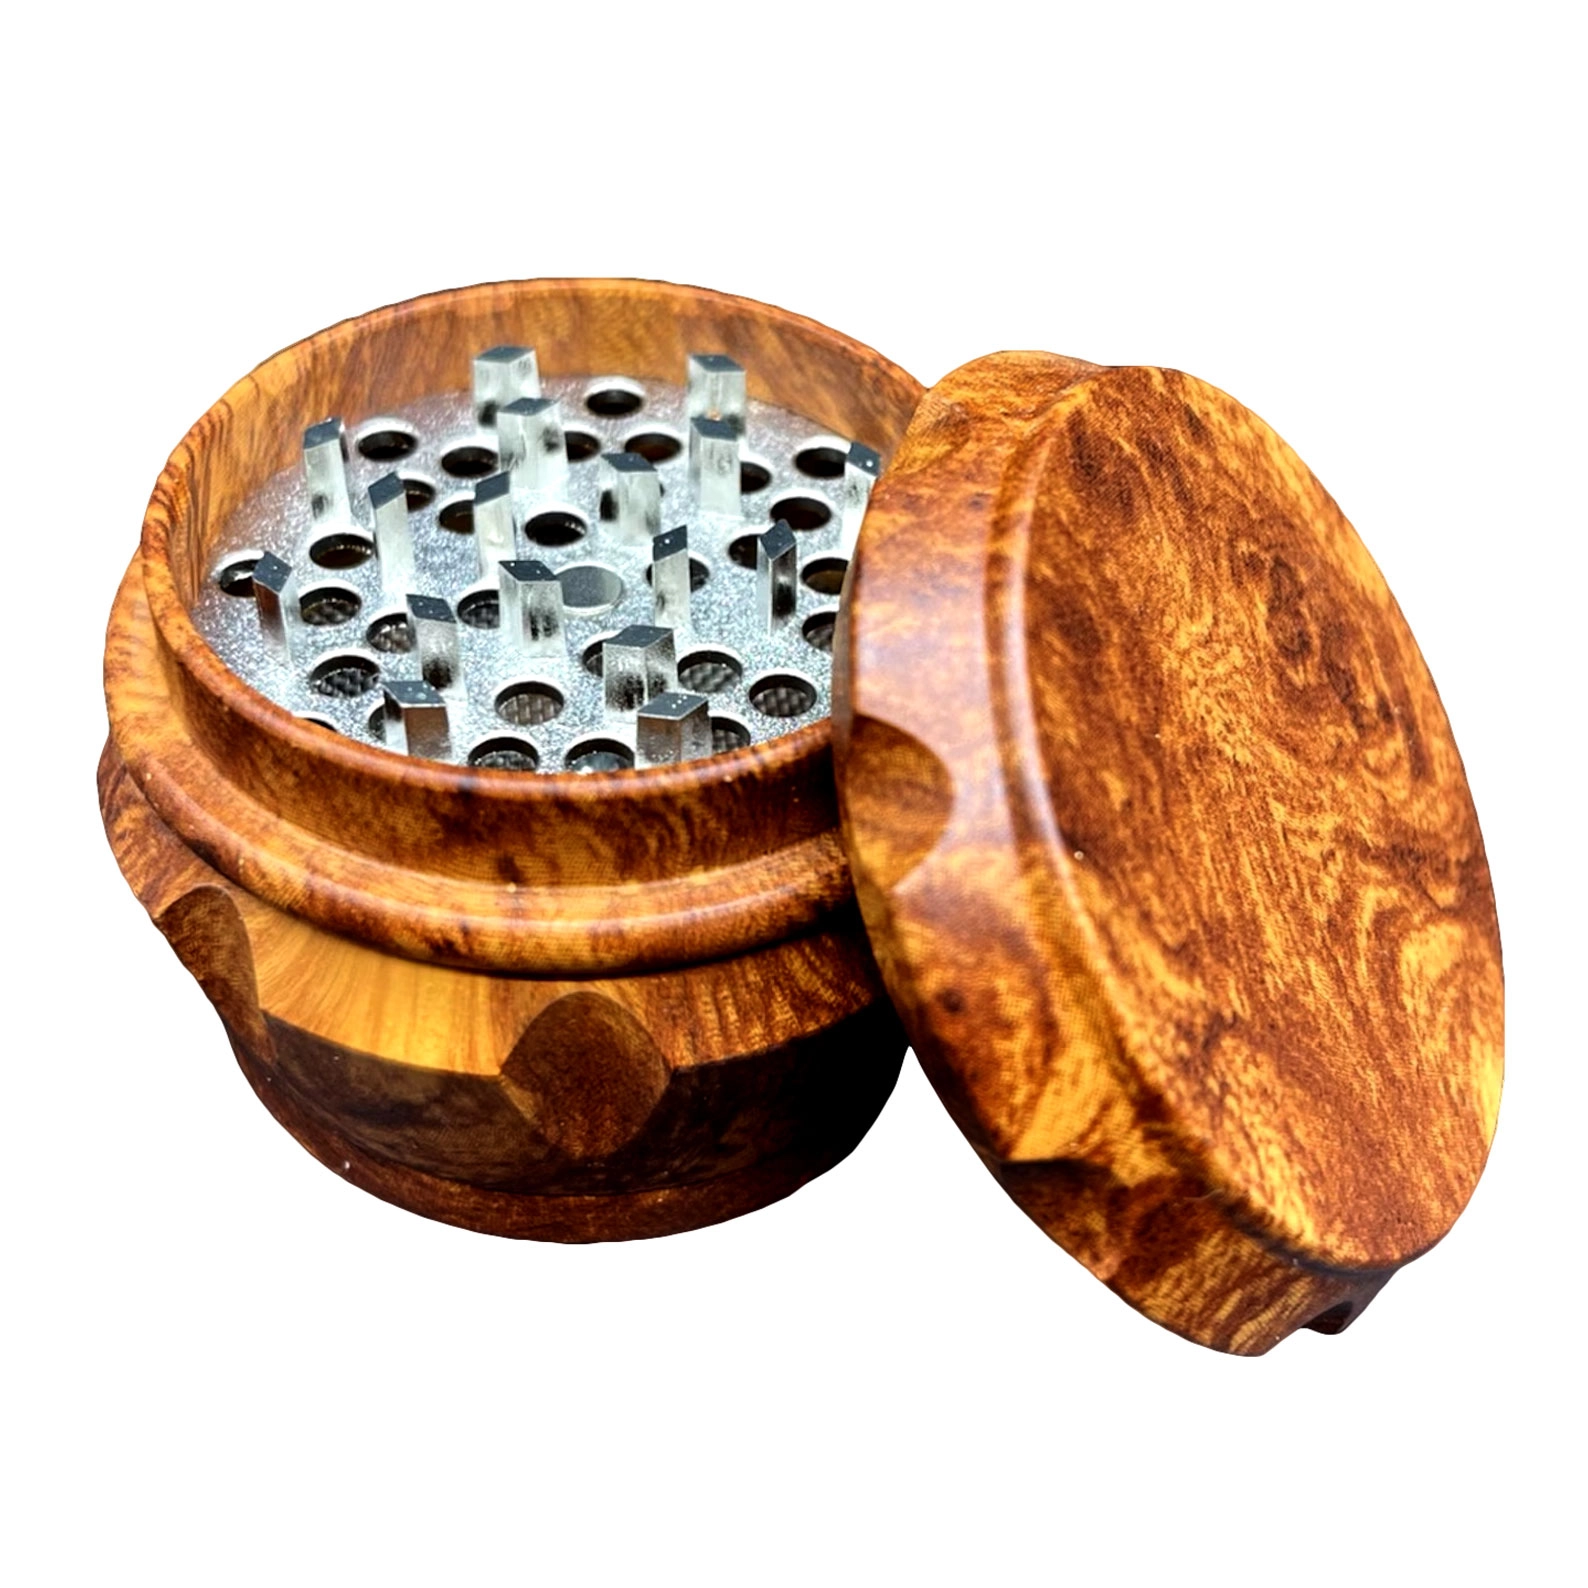 Faux Wooden Grinder | Best One Hitters, Dugouts, & Pocket Pipes